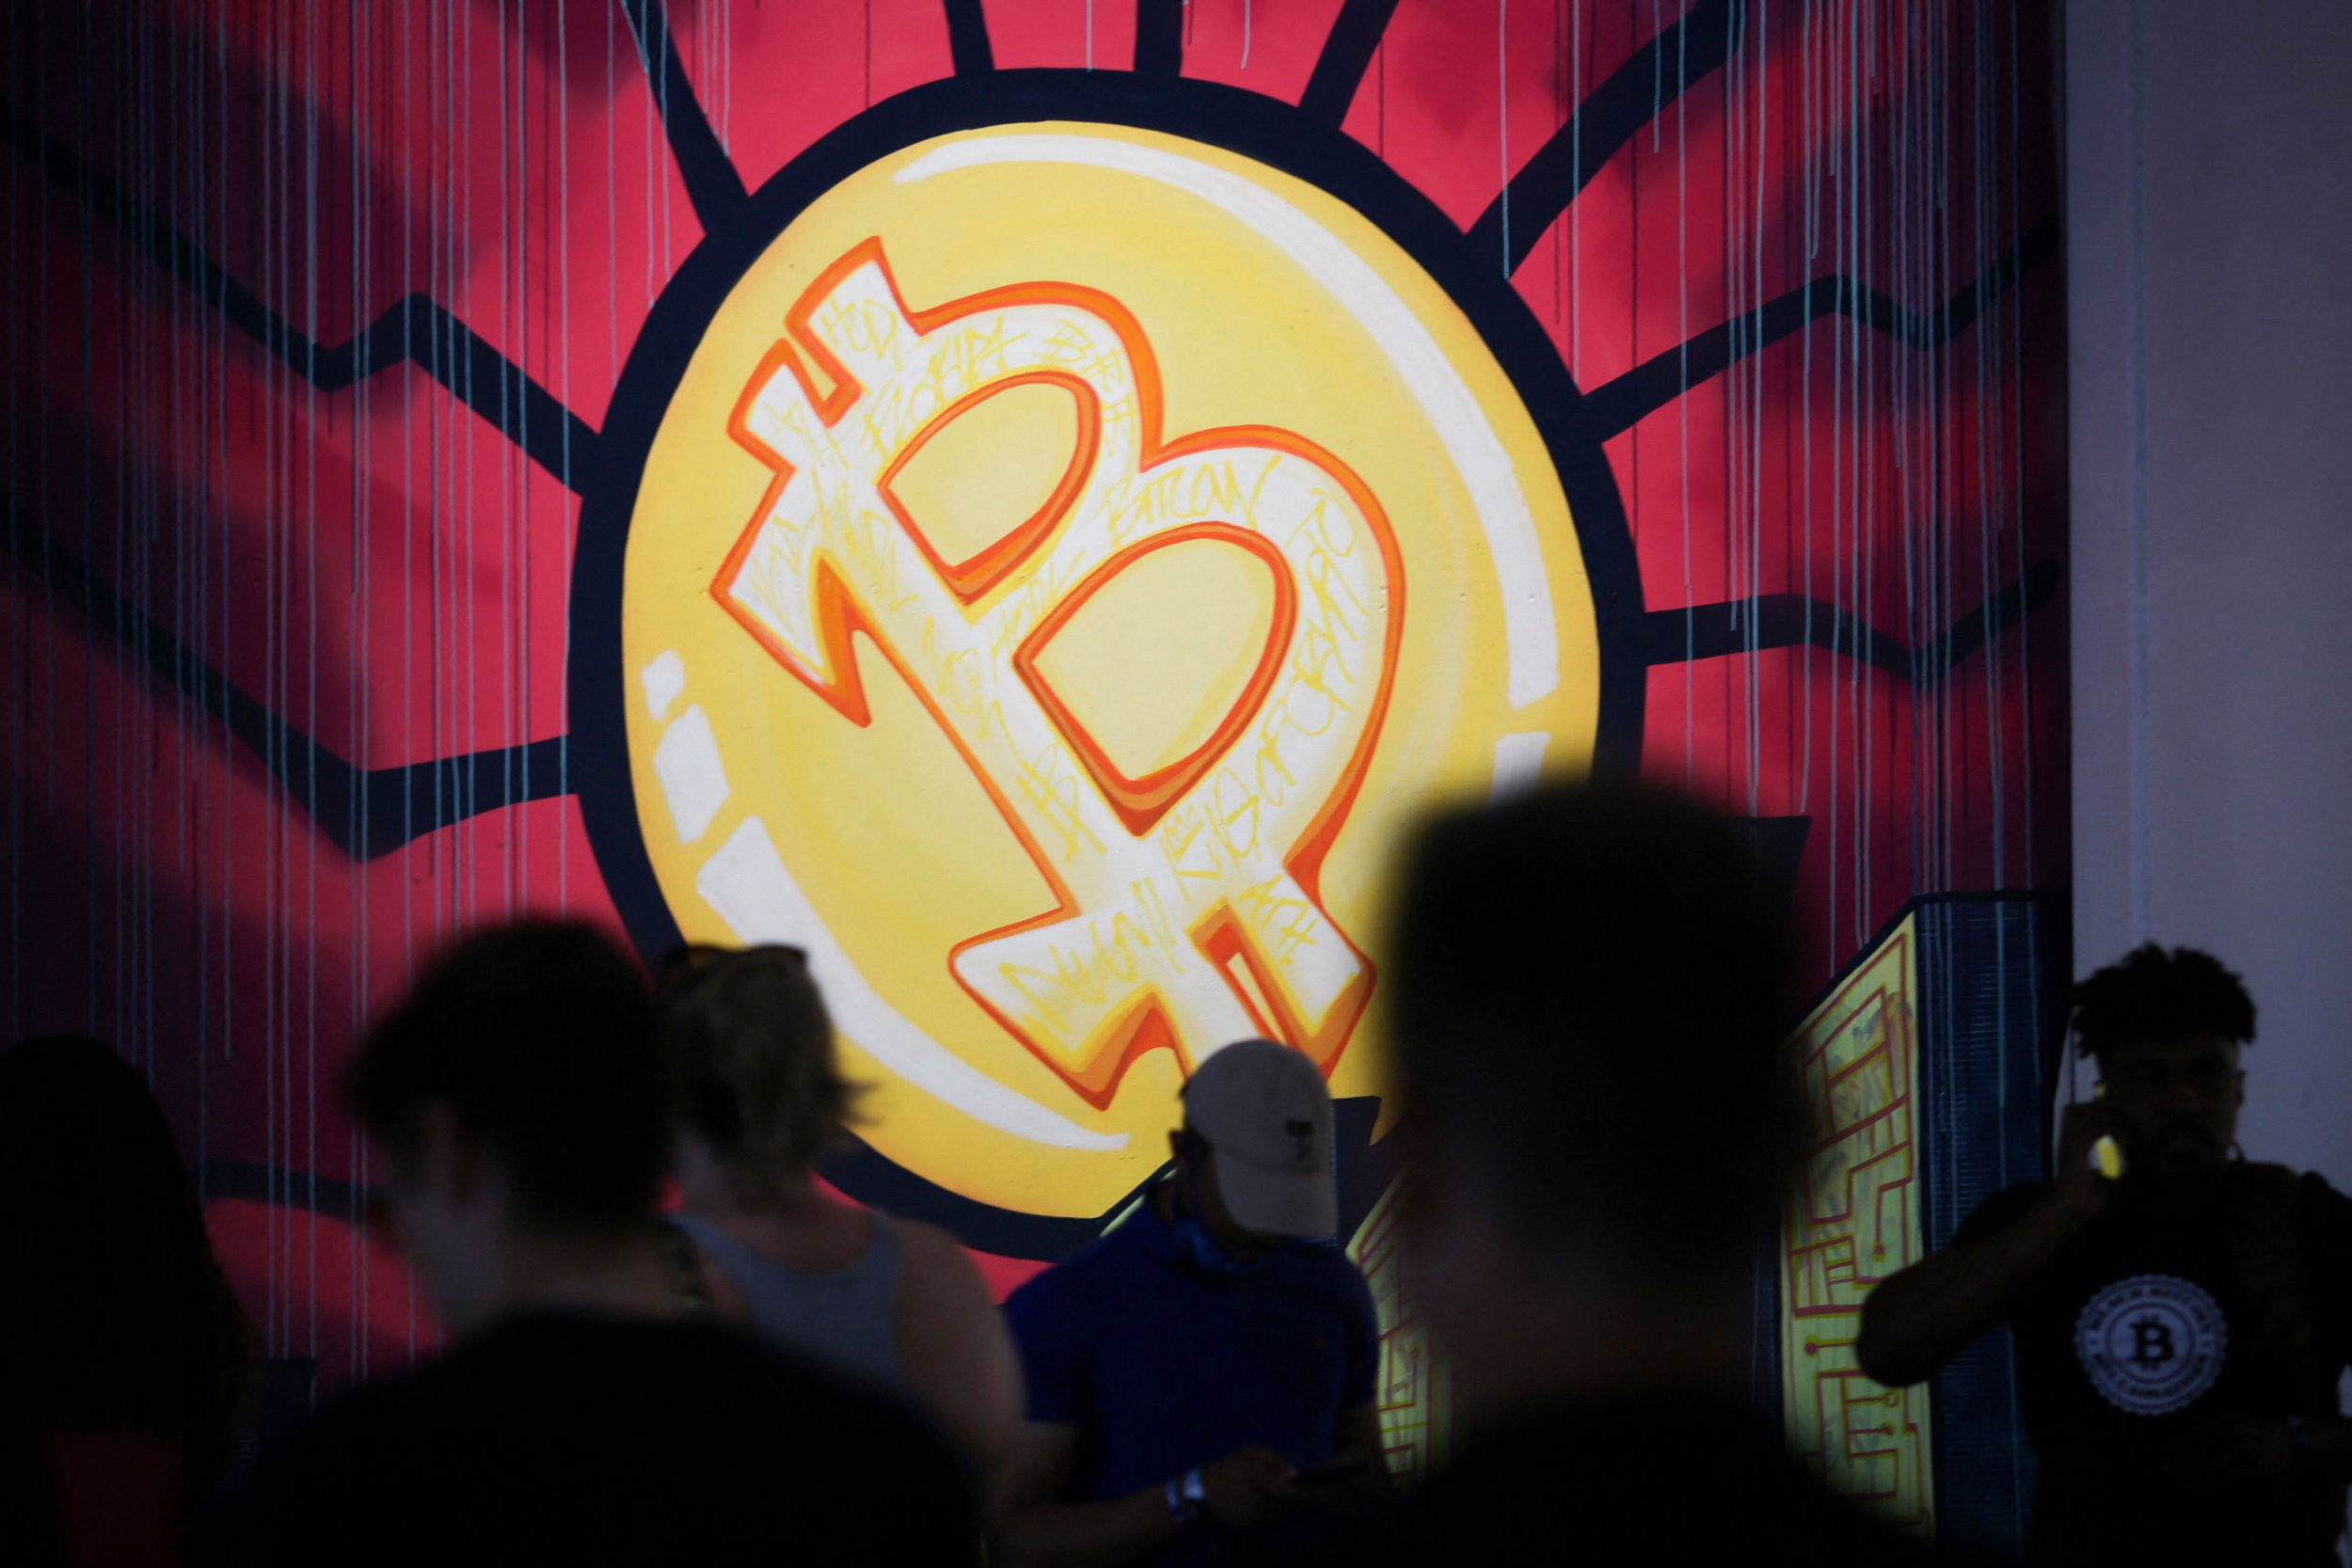 Crypto fans went to a massive Bitcoin event in Miami and promptly got Covid